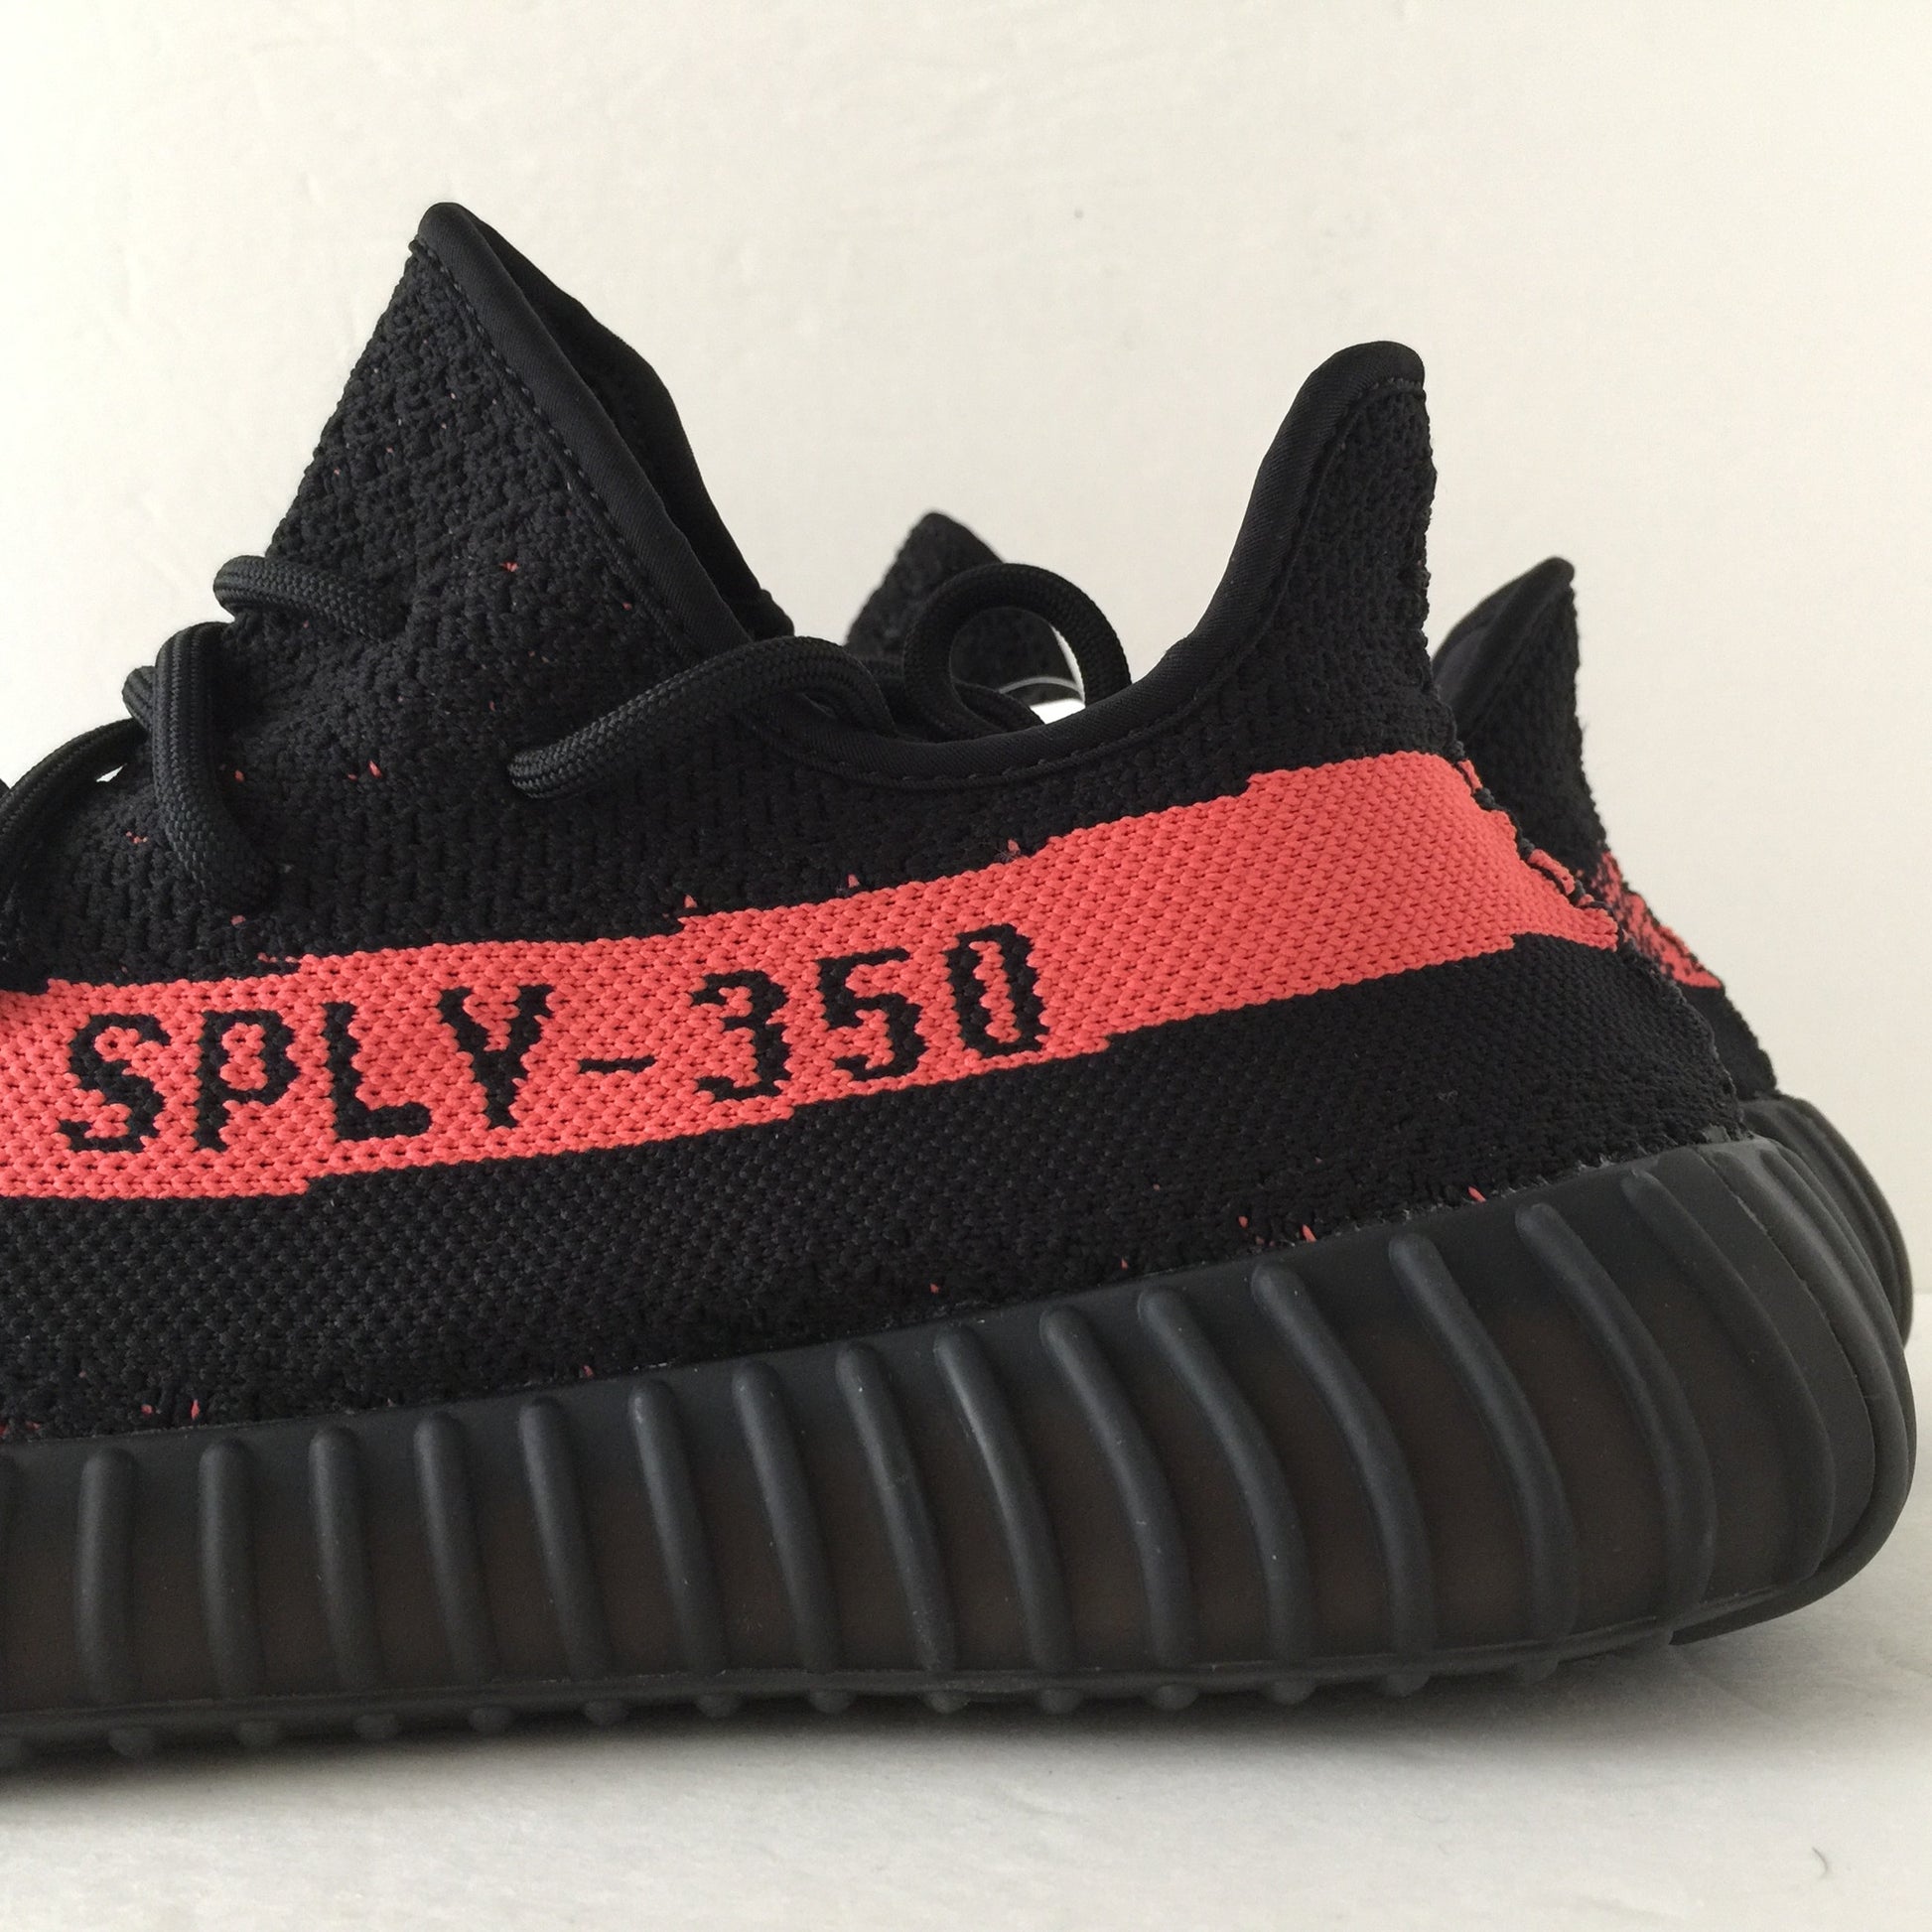 DS Adidas Yeezy Boost 350 V2 Solar Red Size 9.5 - DOPEFOOT
 - 5